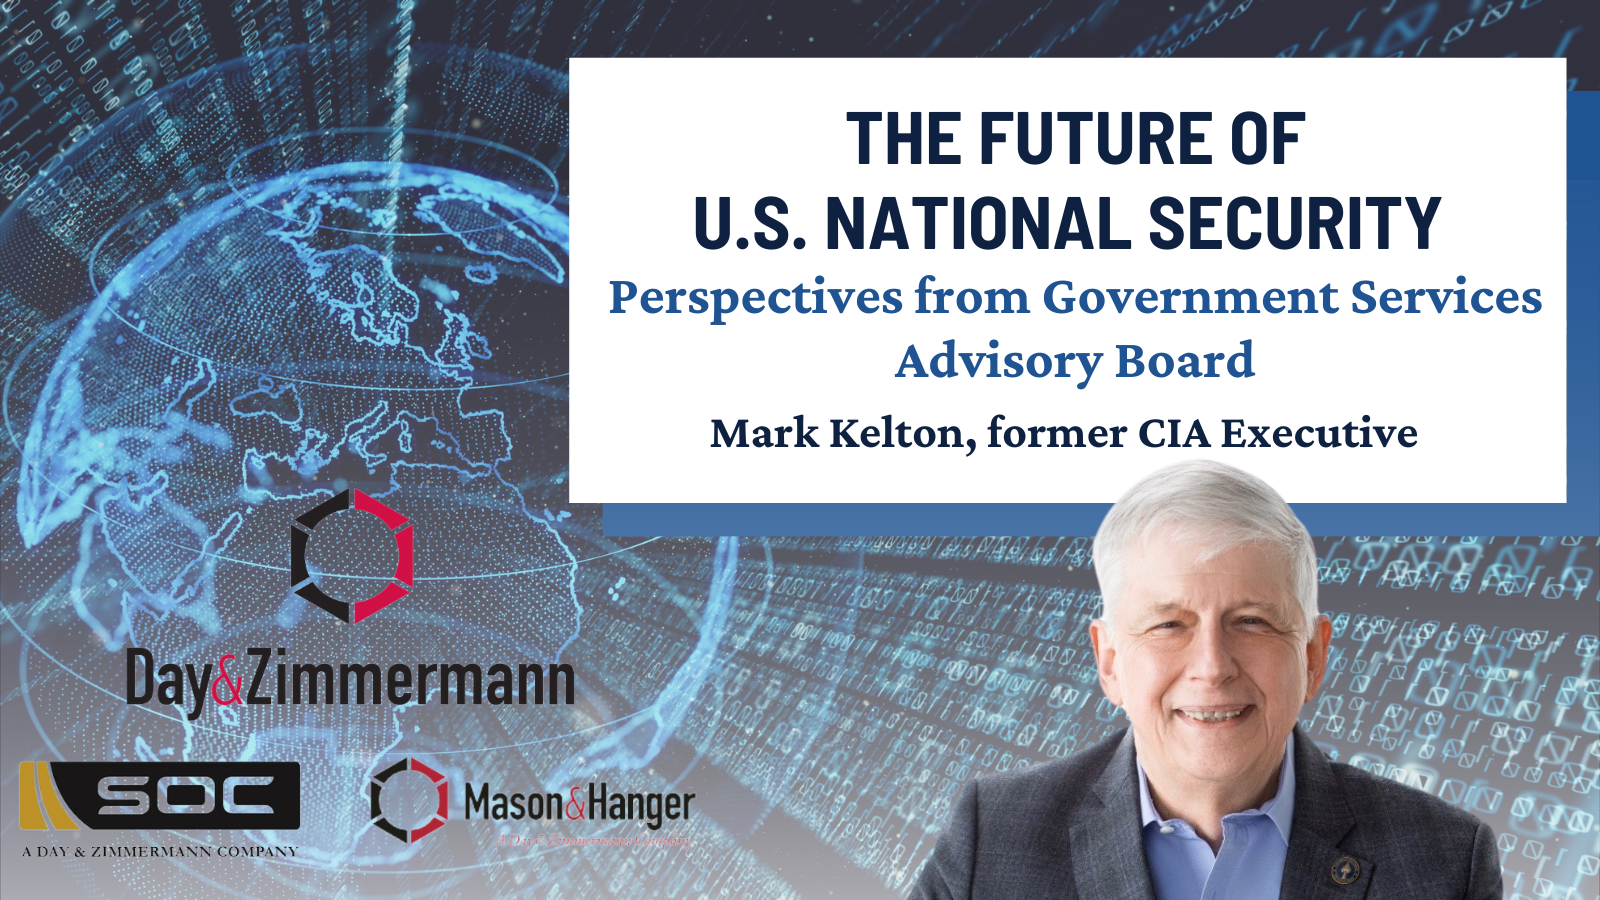 Video Series: The Future of U.S. National Security with Mark Kelton, Former CIA Executive featured image